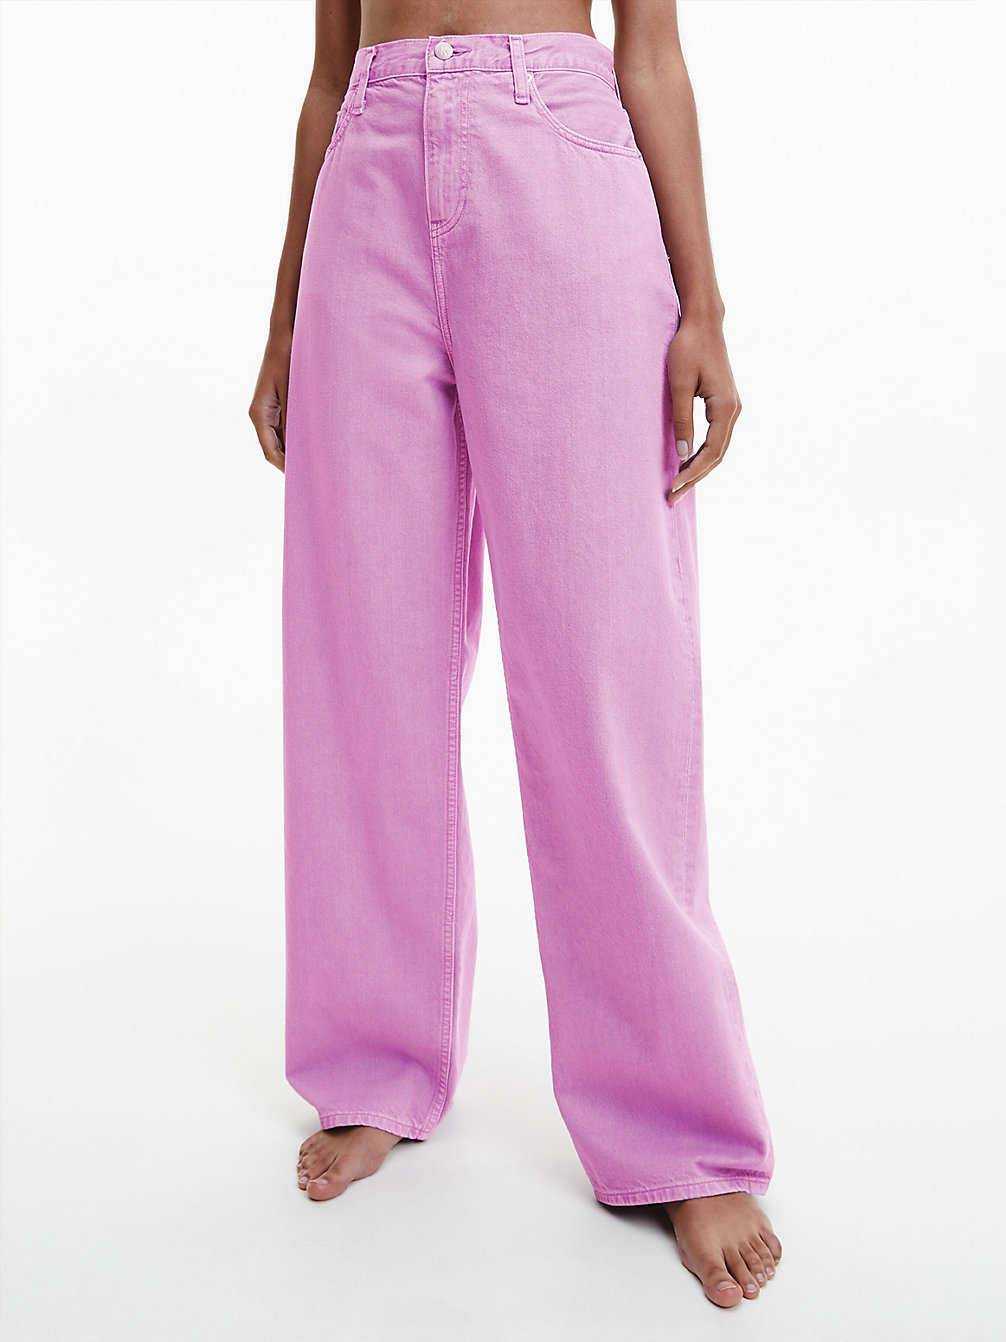 LAVENDER High Rise Relaxed Jeans undefined Damen Calvin Klein